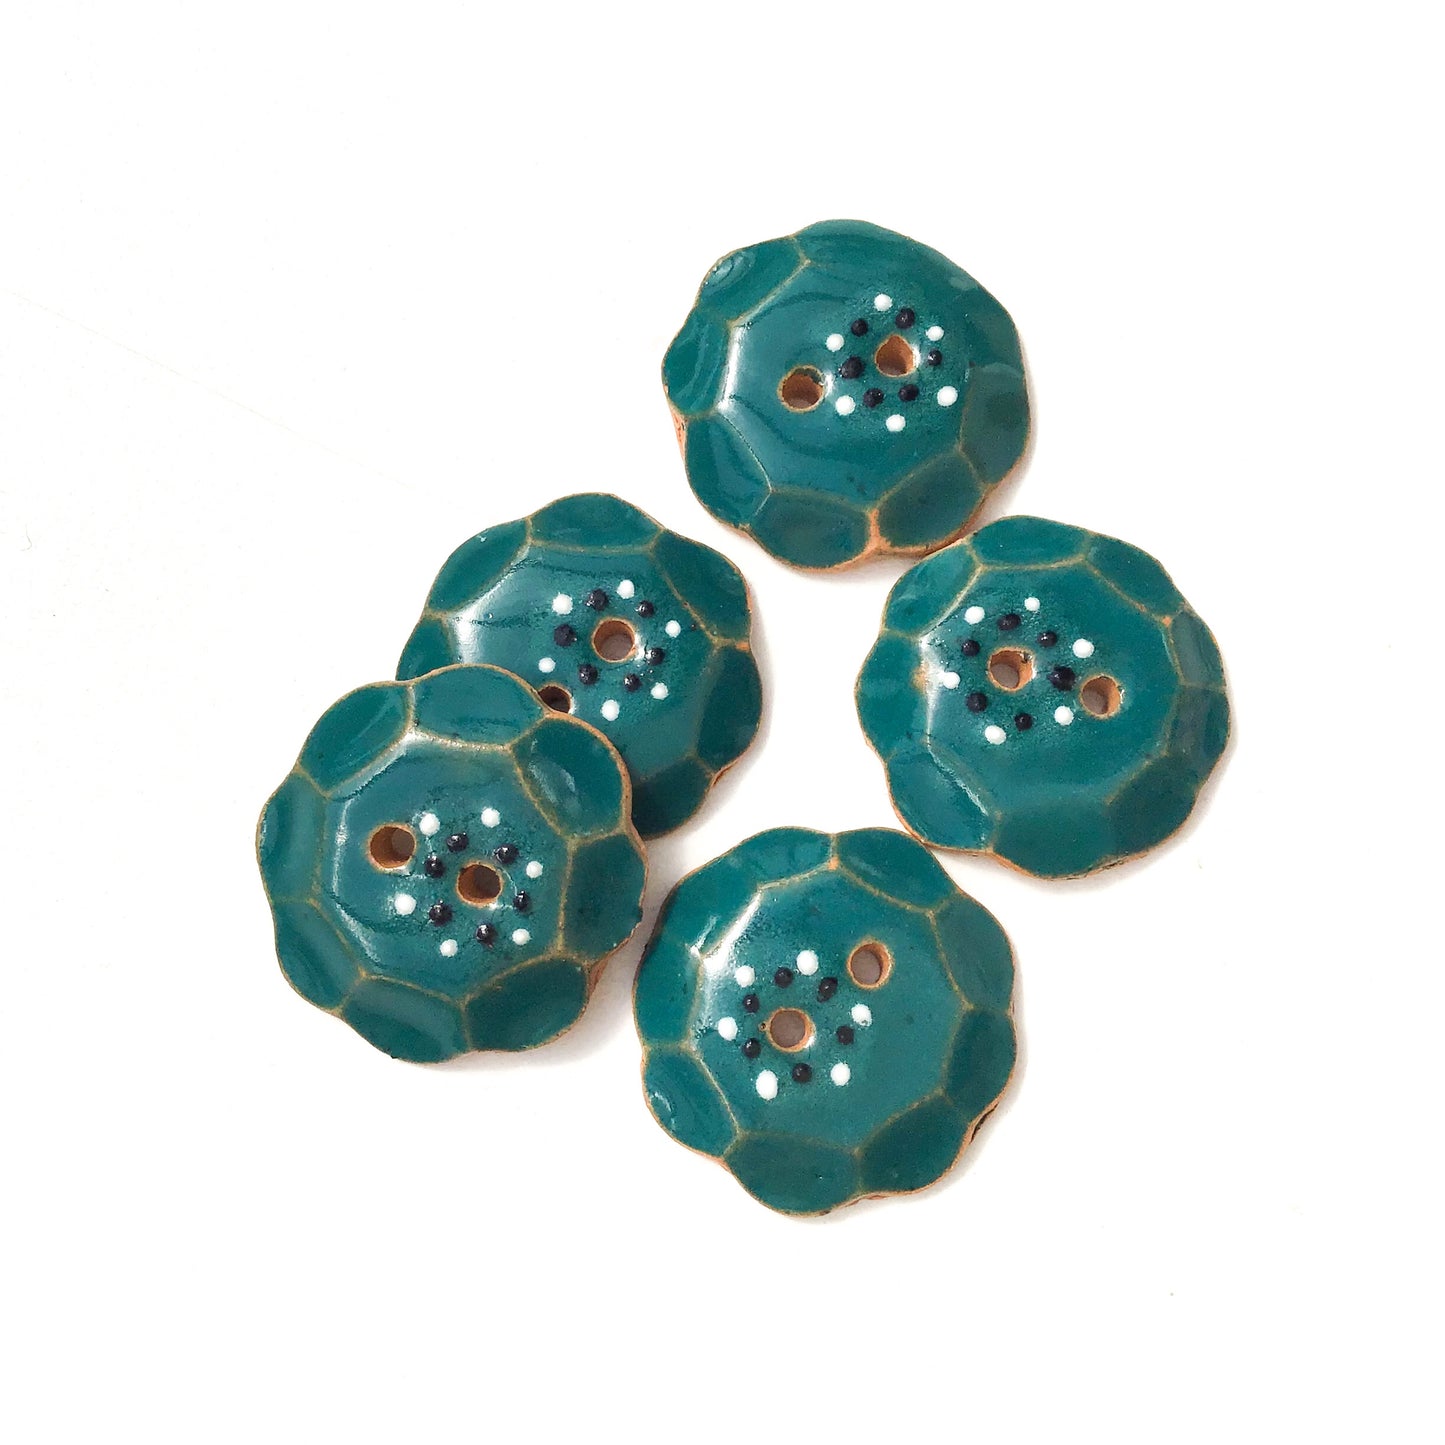 Teal "Spark" Ceramic Buttons with Scallops - Teal Clay Buttons - 7/8" - 5 Pack